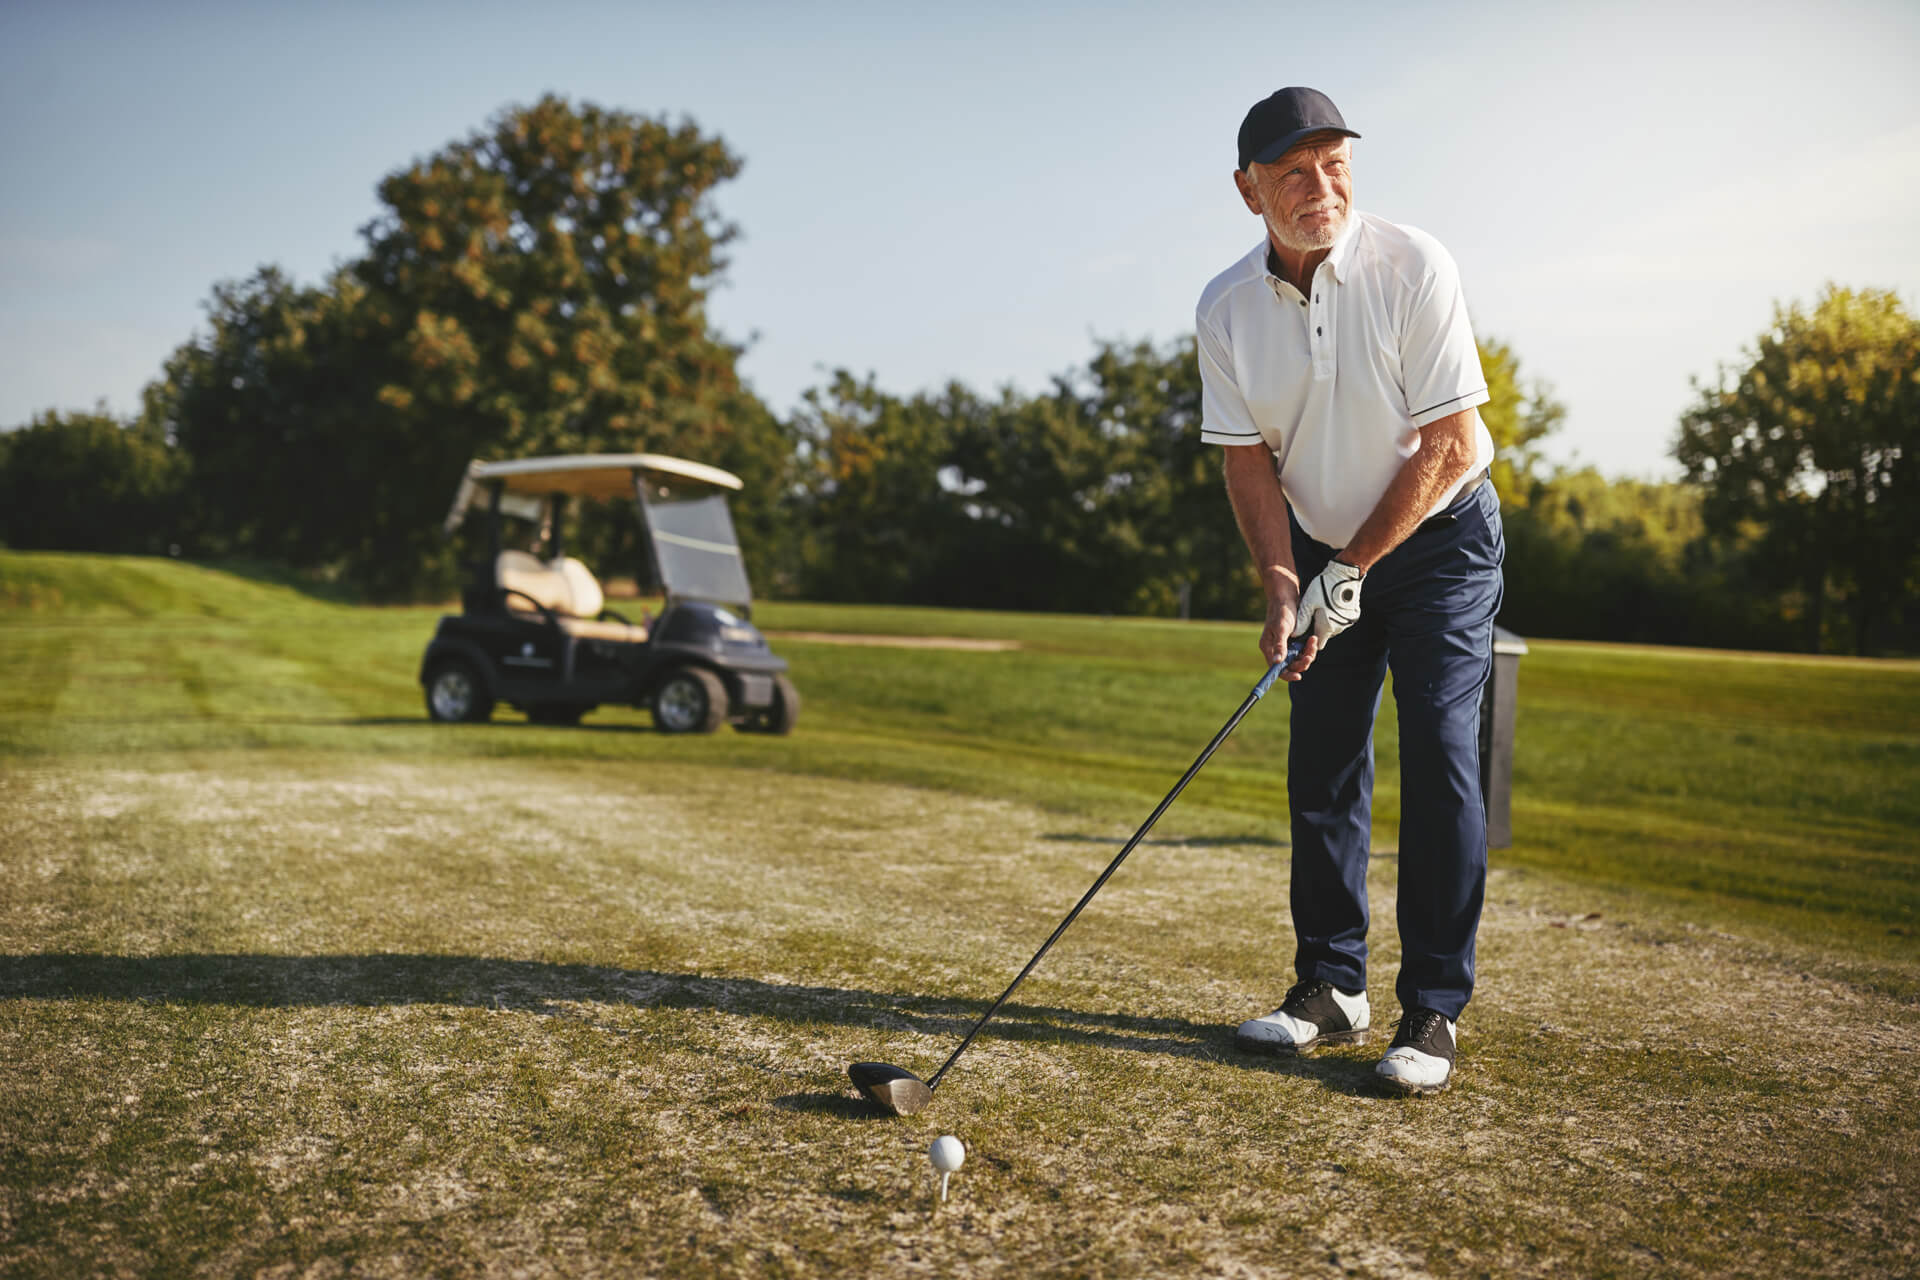 Pelvic floor training helps against incontinence - Enjoy golf and sport without worries